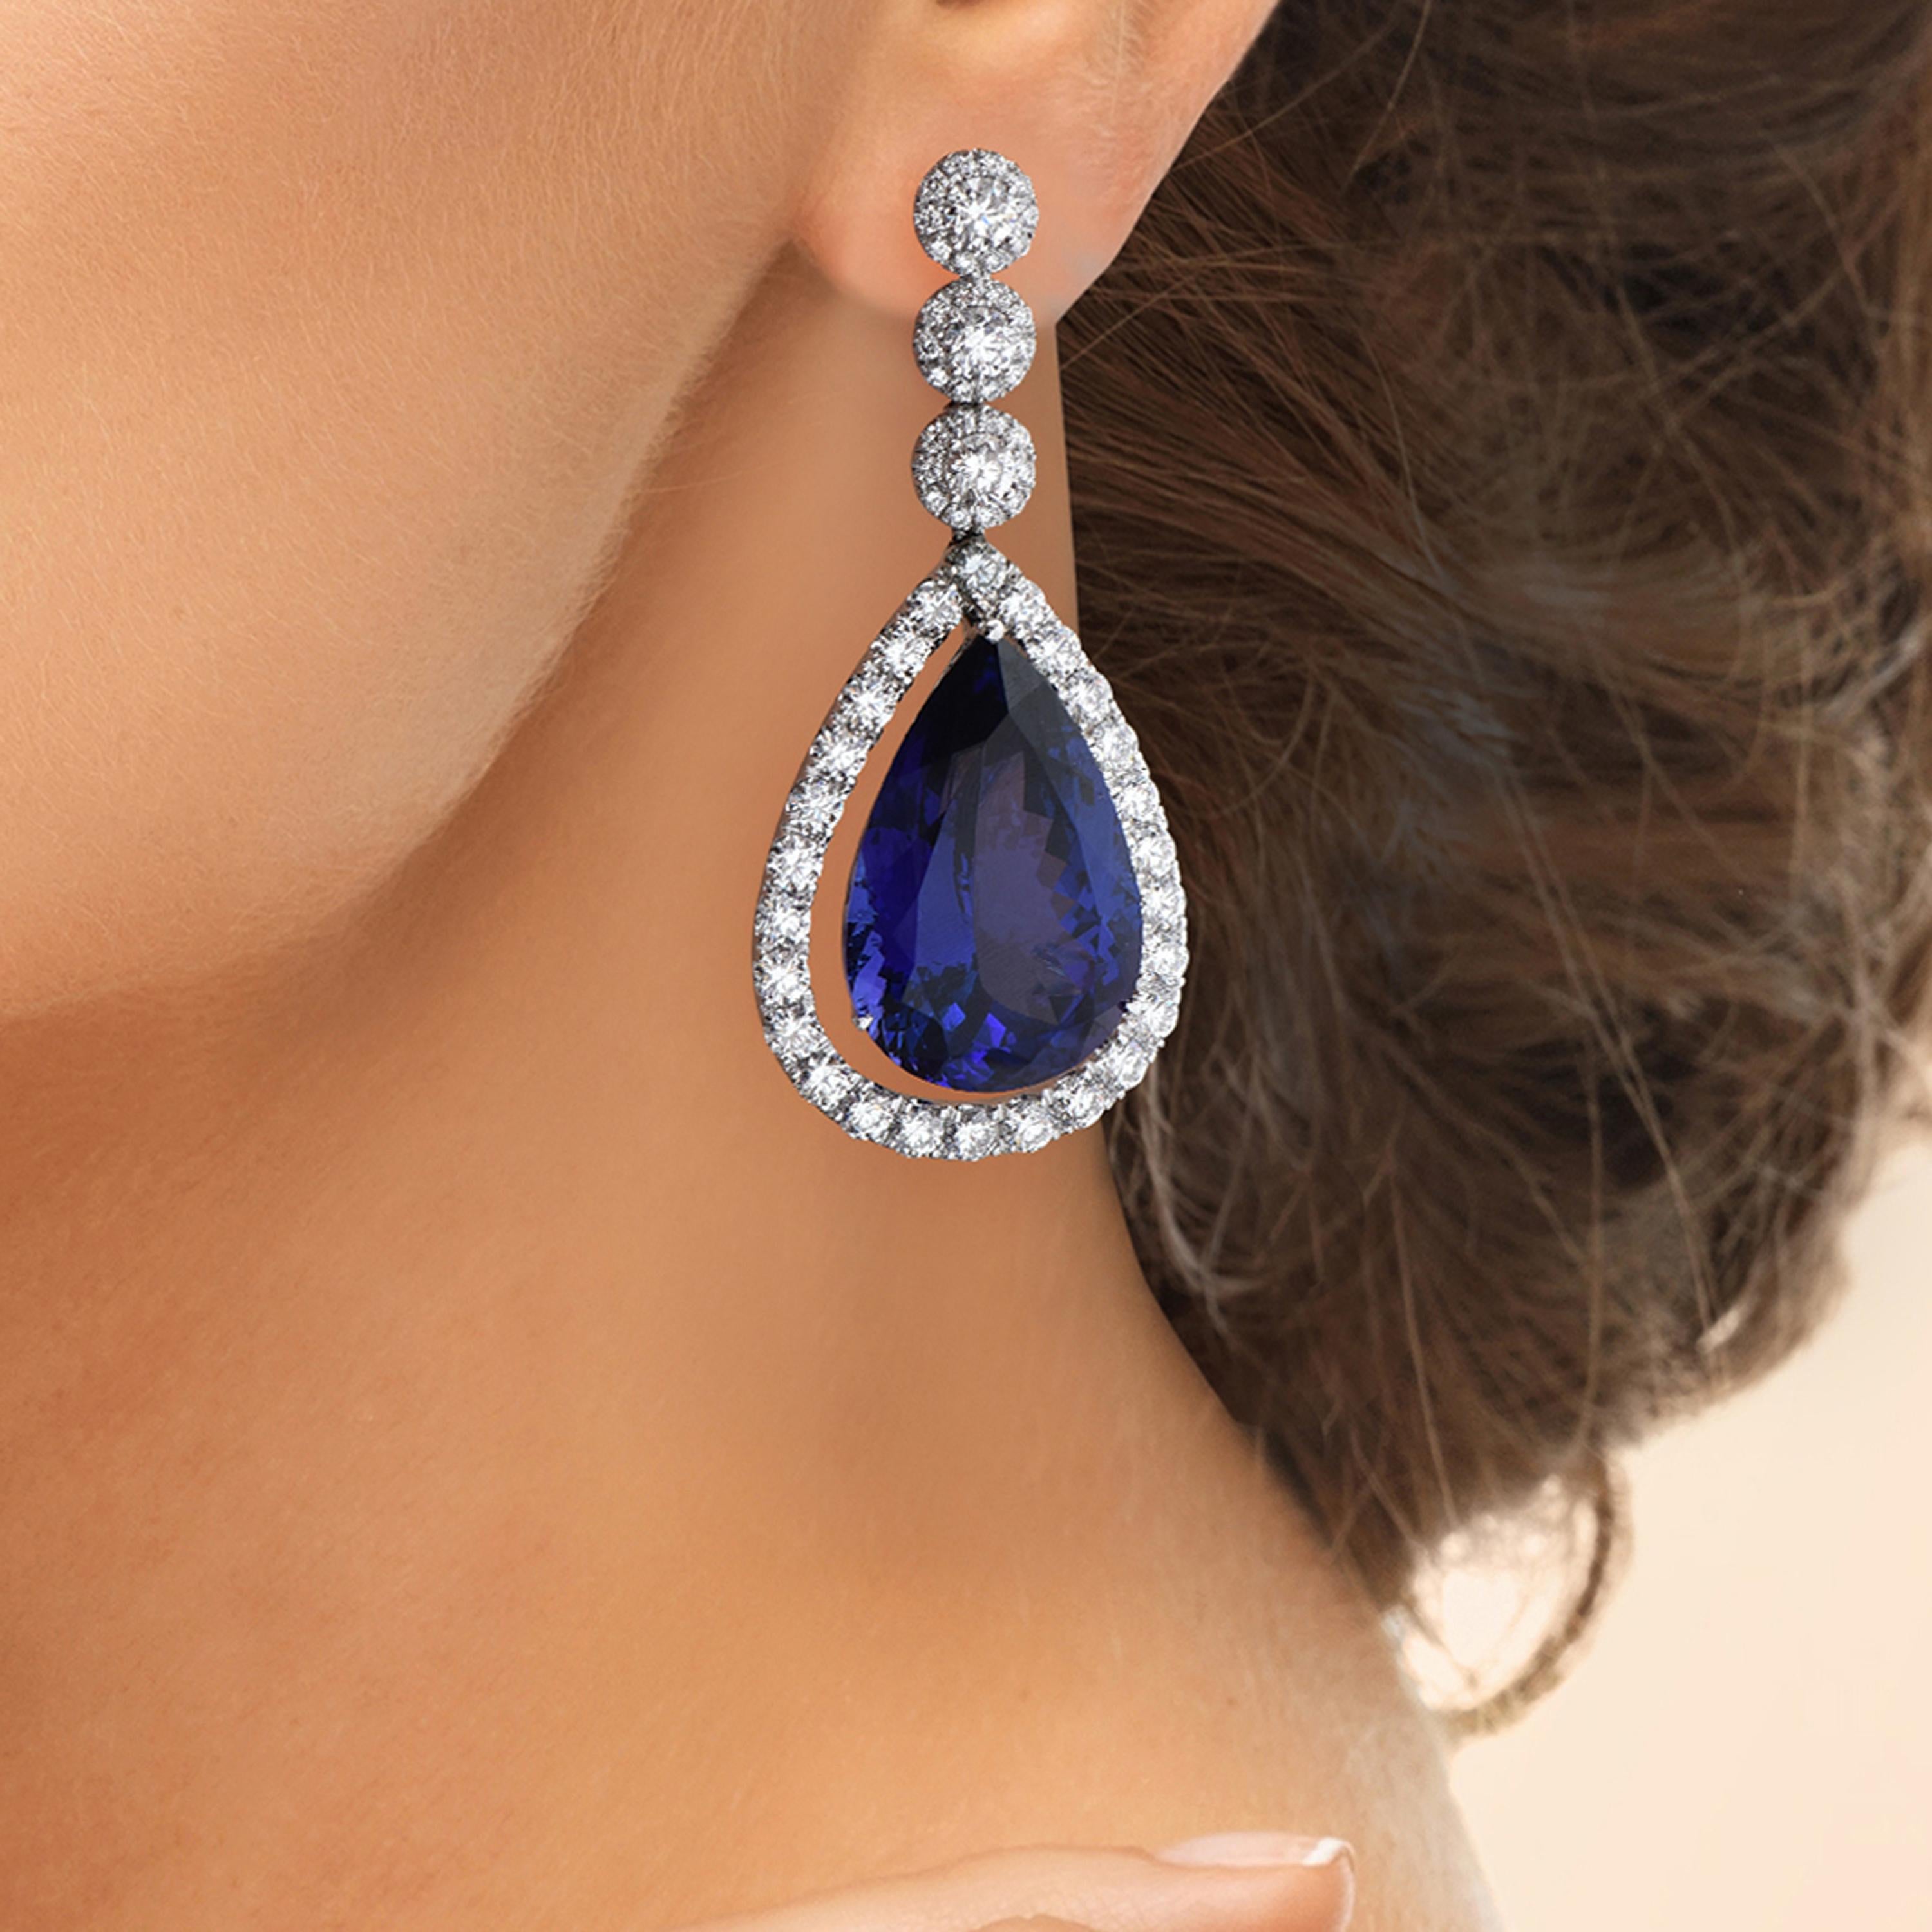 Oval Cut Laviere 70.12 Carat Tanzanite and Diamond Earrings For Sale